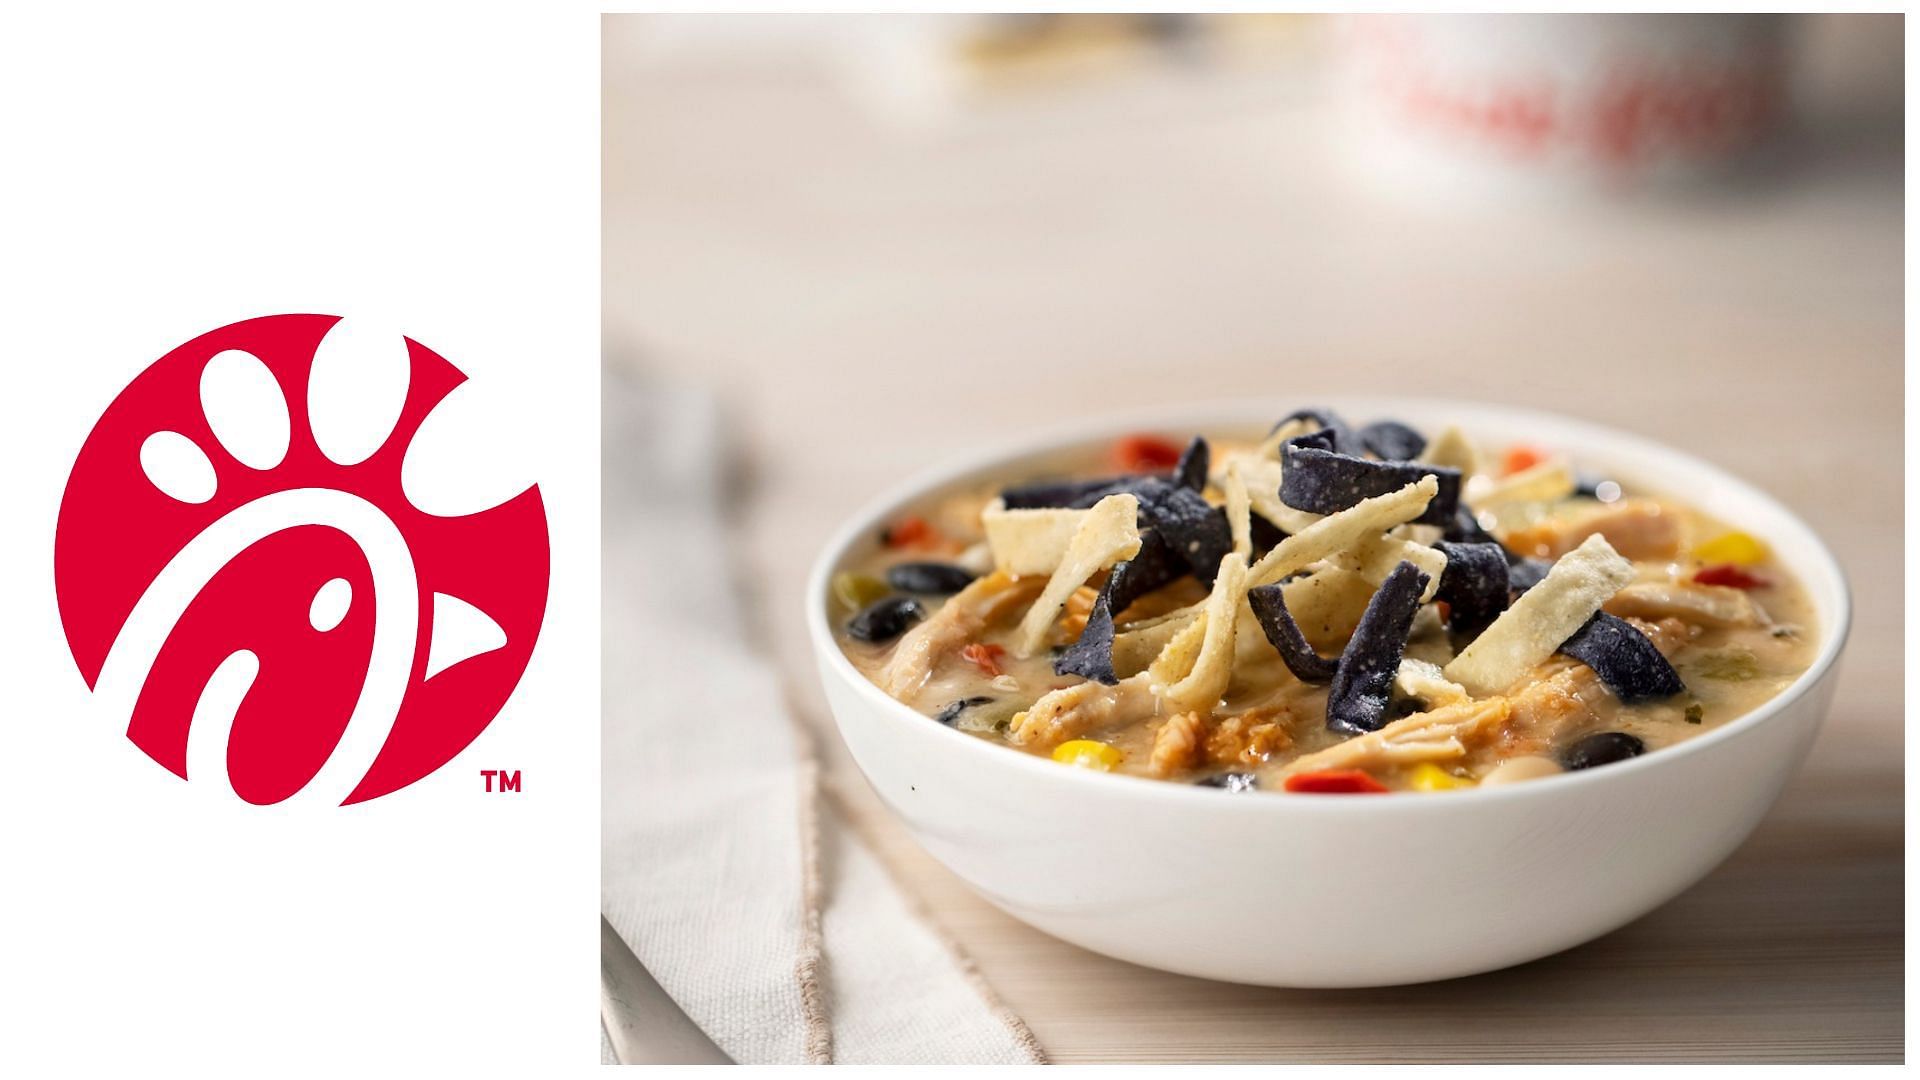 Chicken Tortilla Soup with tortilla toppings (Image via Chick-Fil-A))